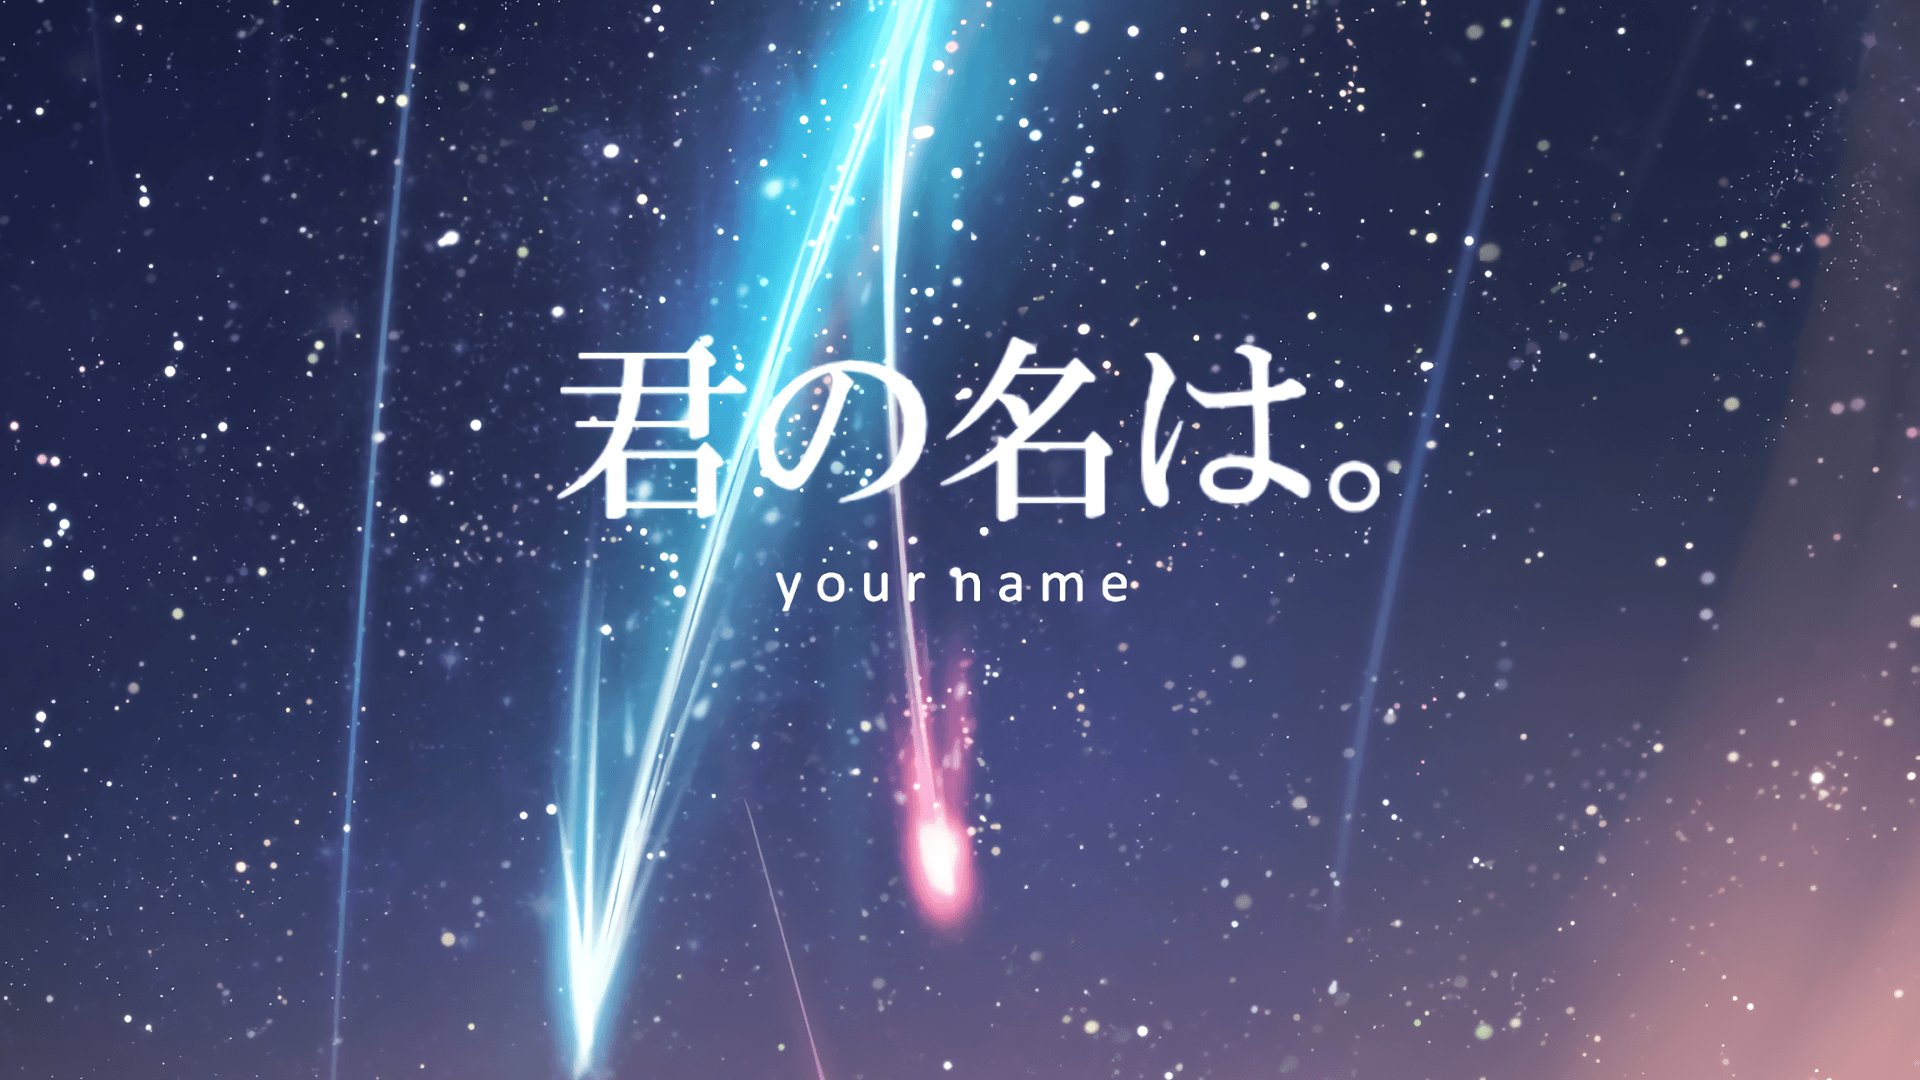 Download 1920x1080 Your Name, Sky, Night, Falling, Stars Wallpaper